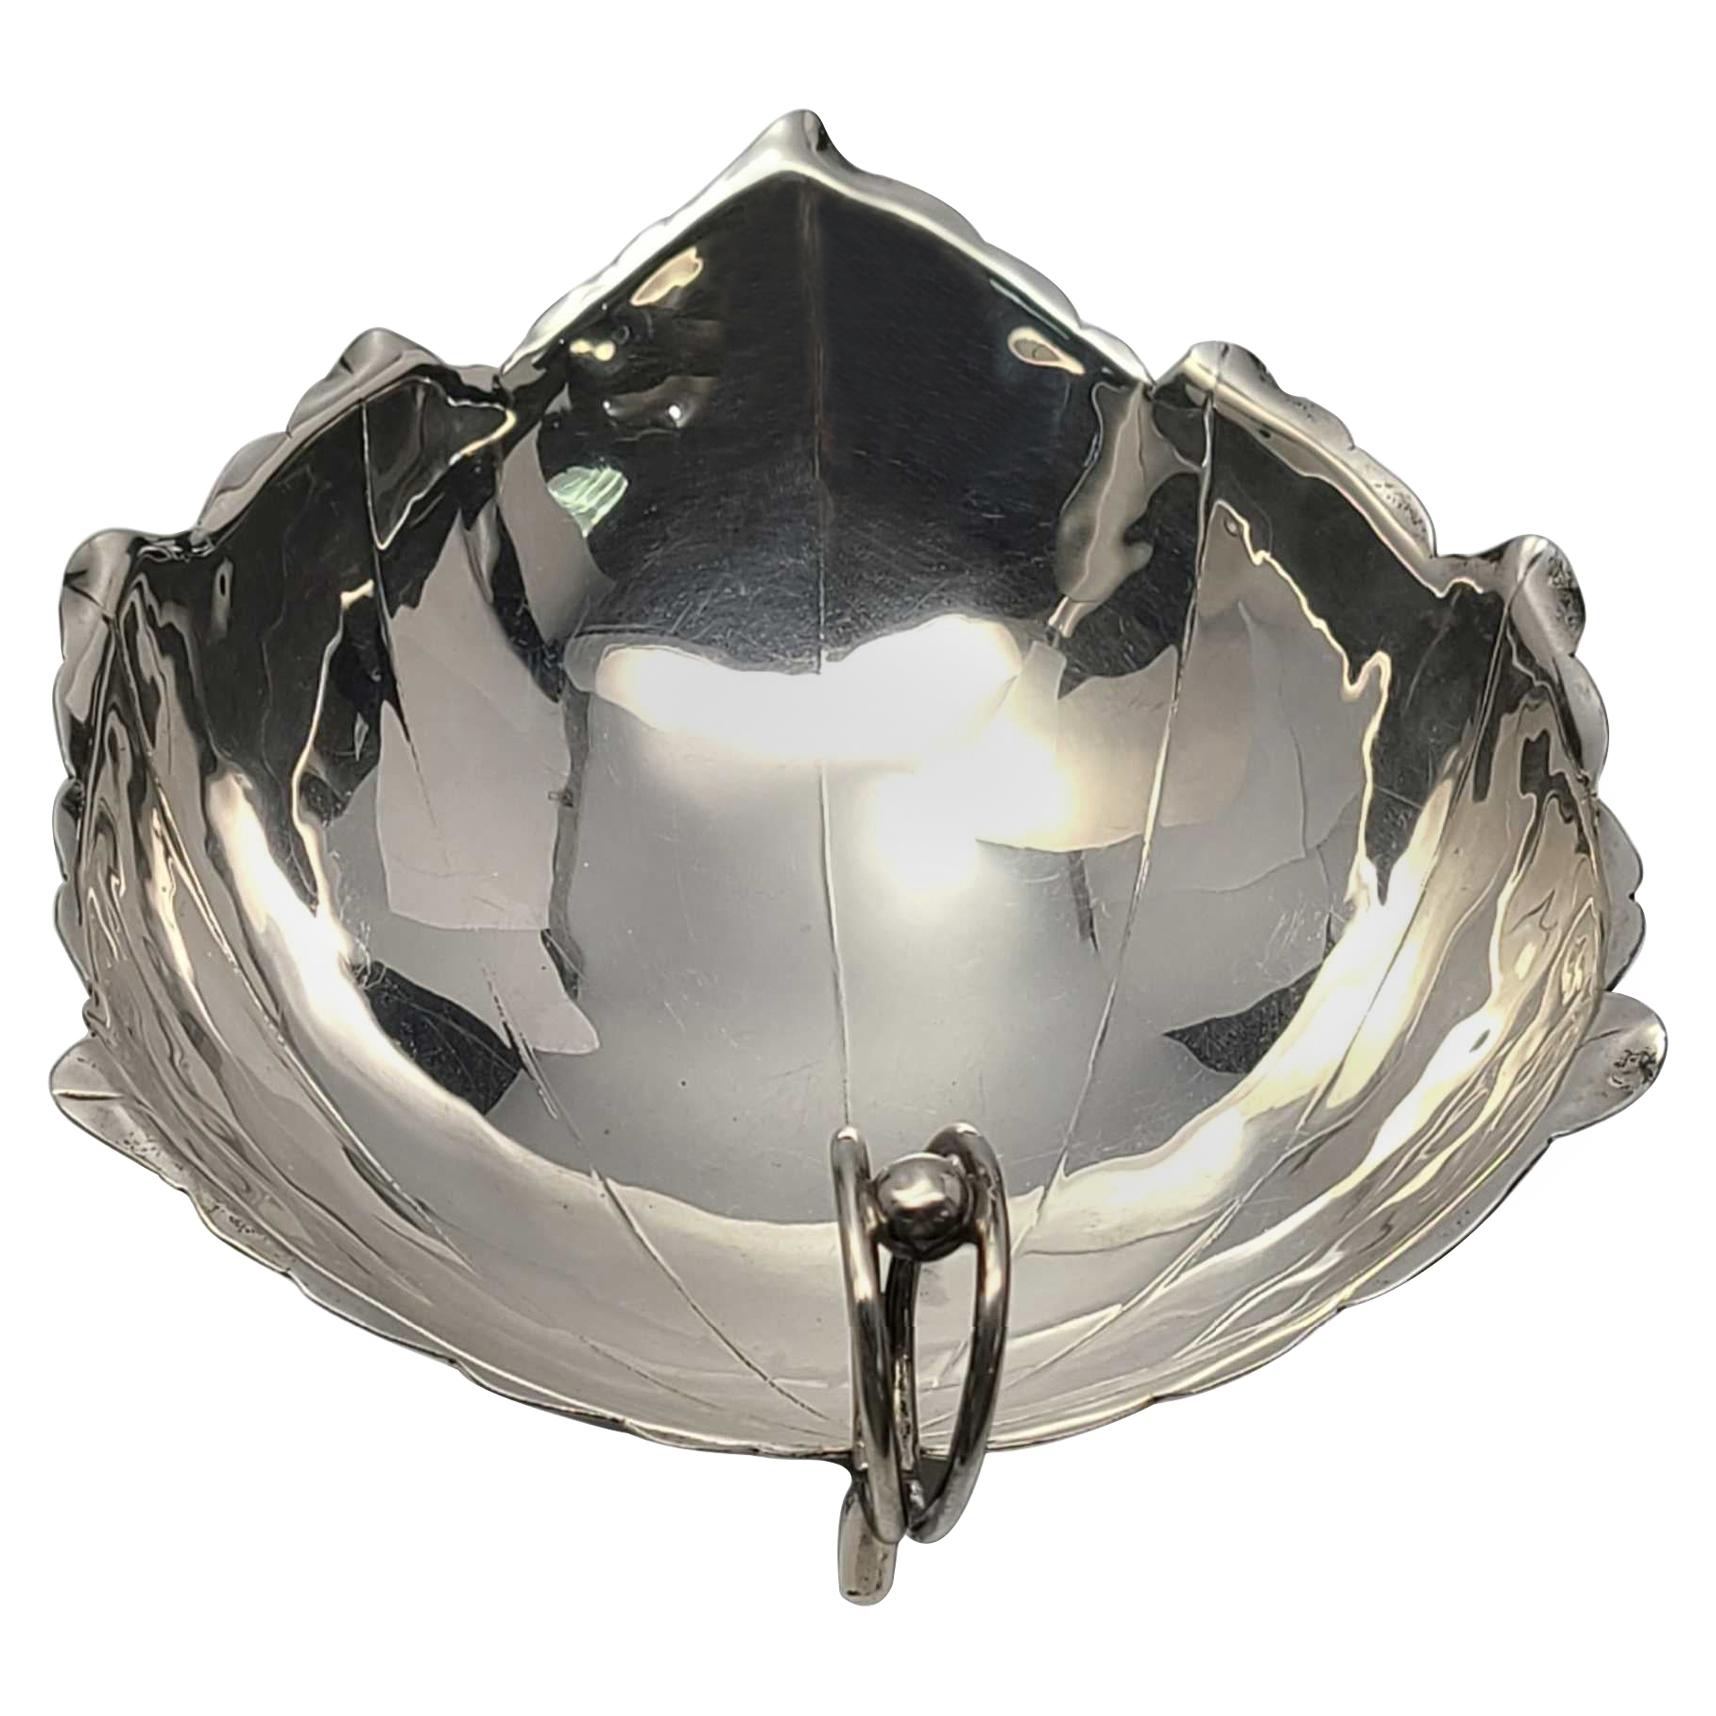 Sciarrotta Handmade Sterling Silver 83C Large Leaf Dish for Gump's For Sale